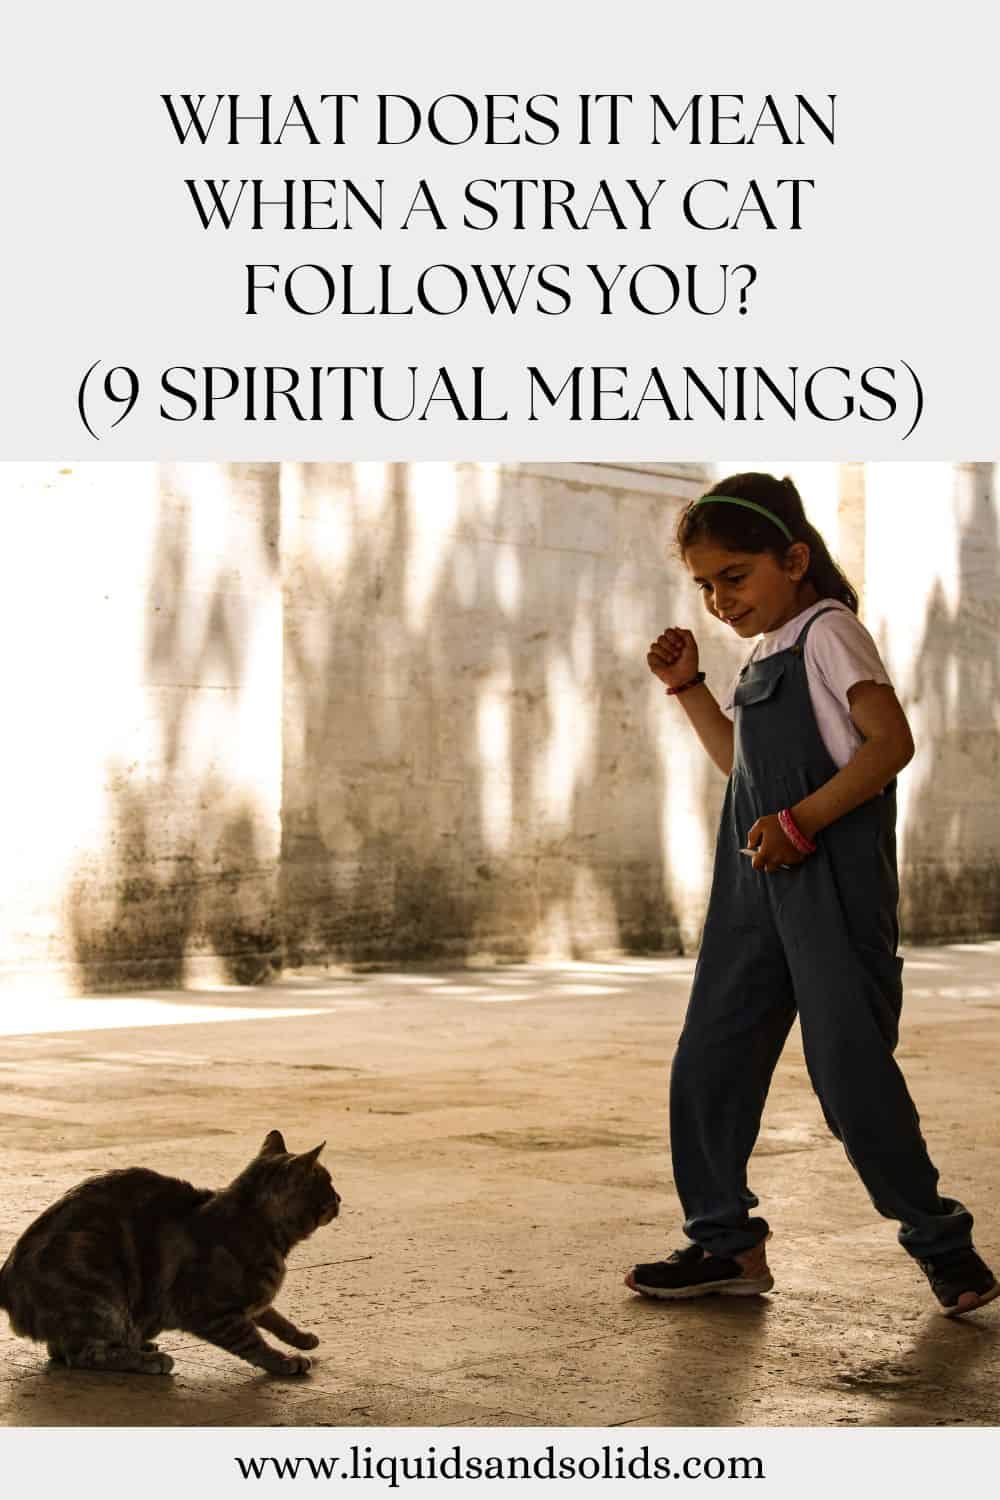 What Does It Mean When A Stray Cat Follows You? (9 Spiritual Meanings)